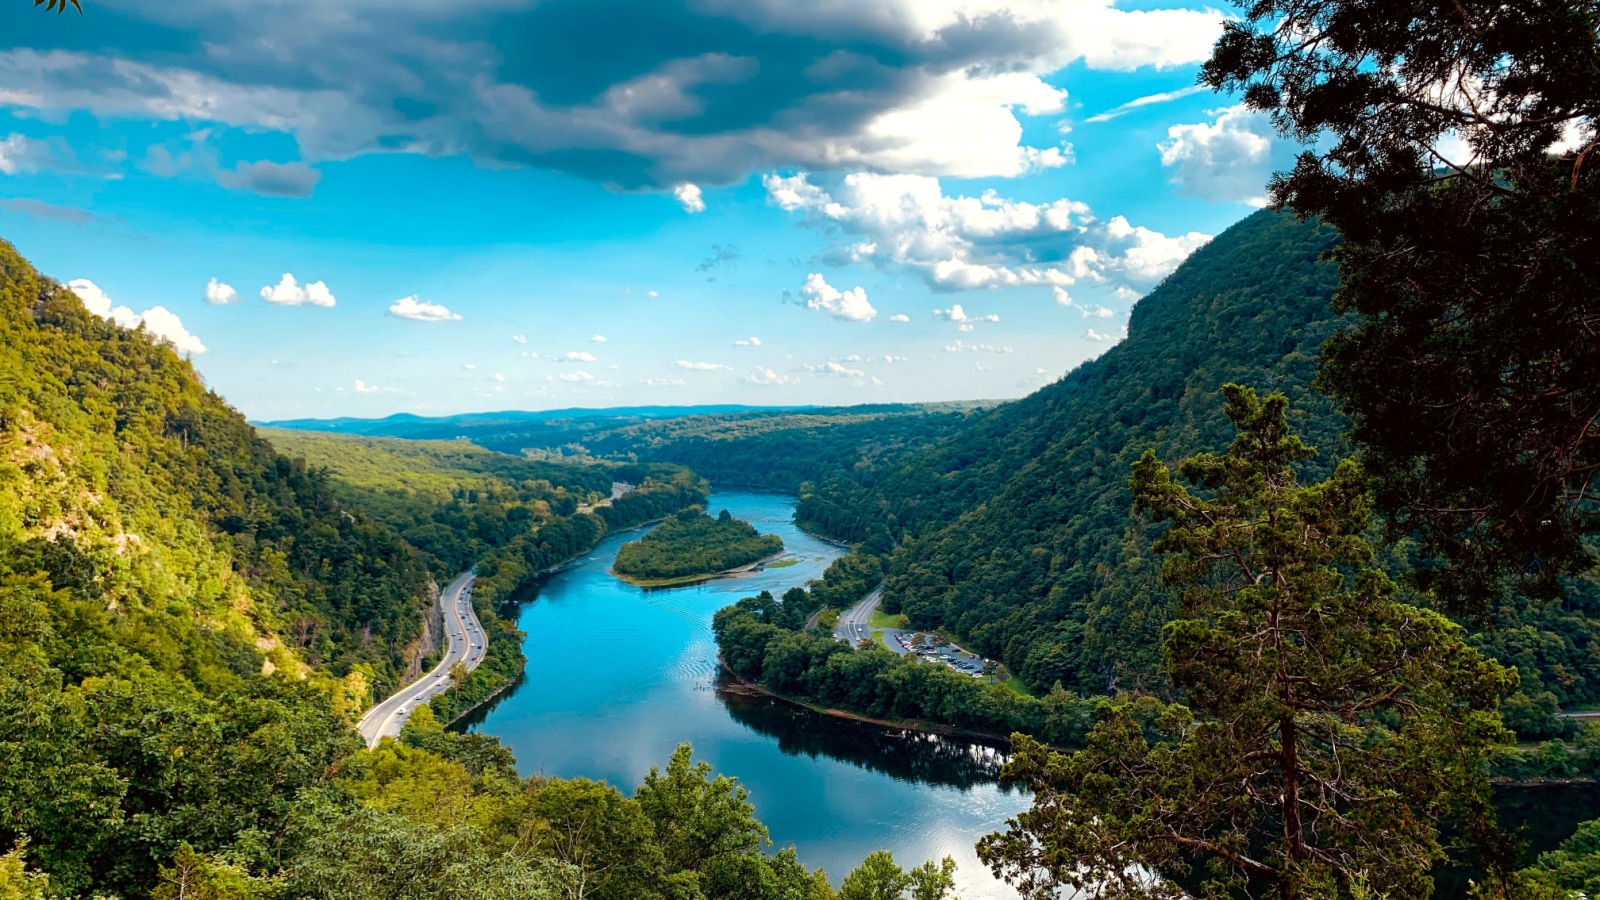 Delaware Water Gap National Recreation Area get on a stretch of the River on the New Jersey and Pennsylvania border. It encloses grassy beaches, forested mountains and slices through Kittatinny Ridge.